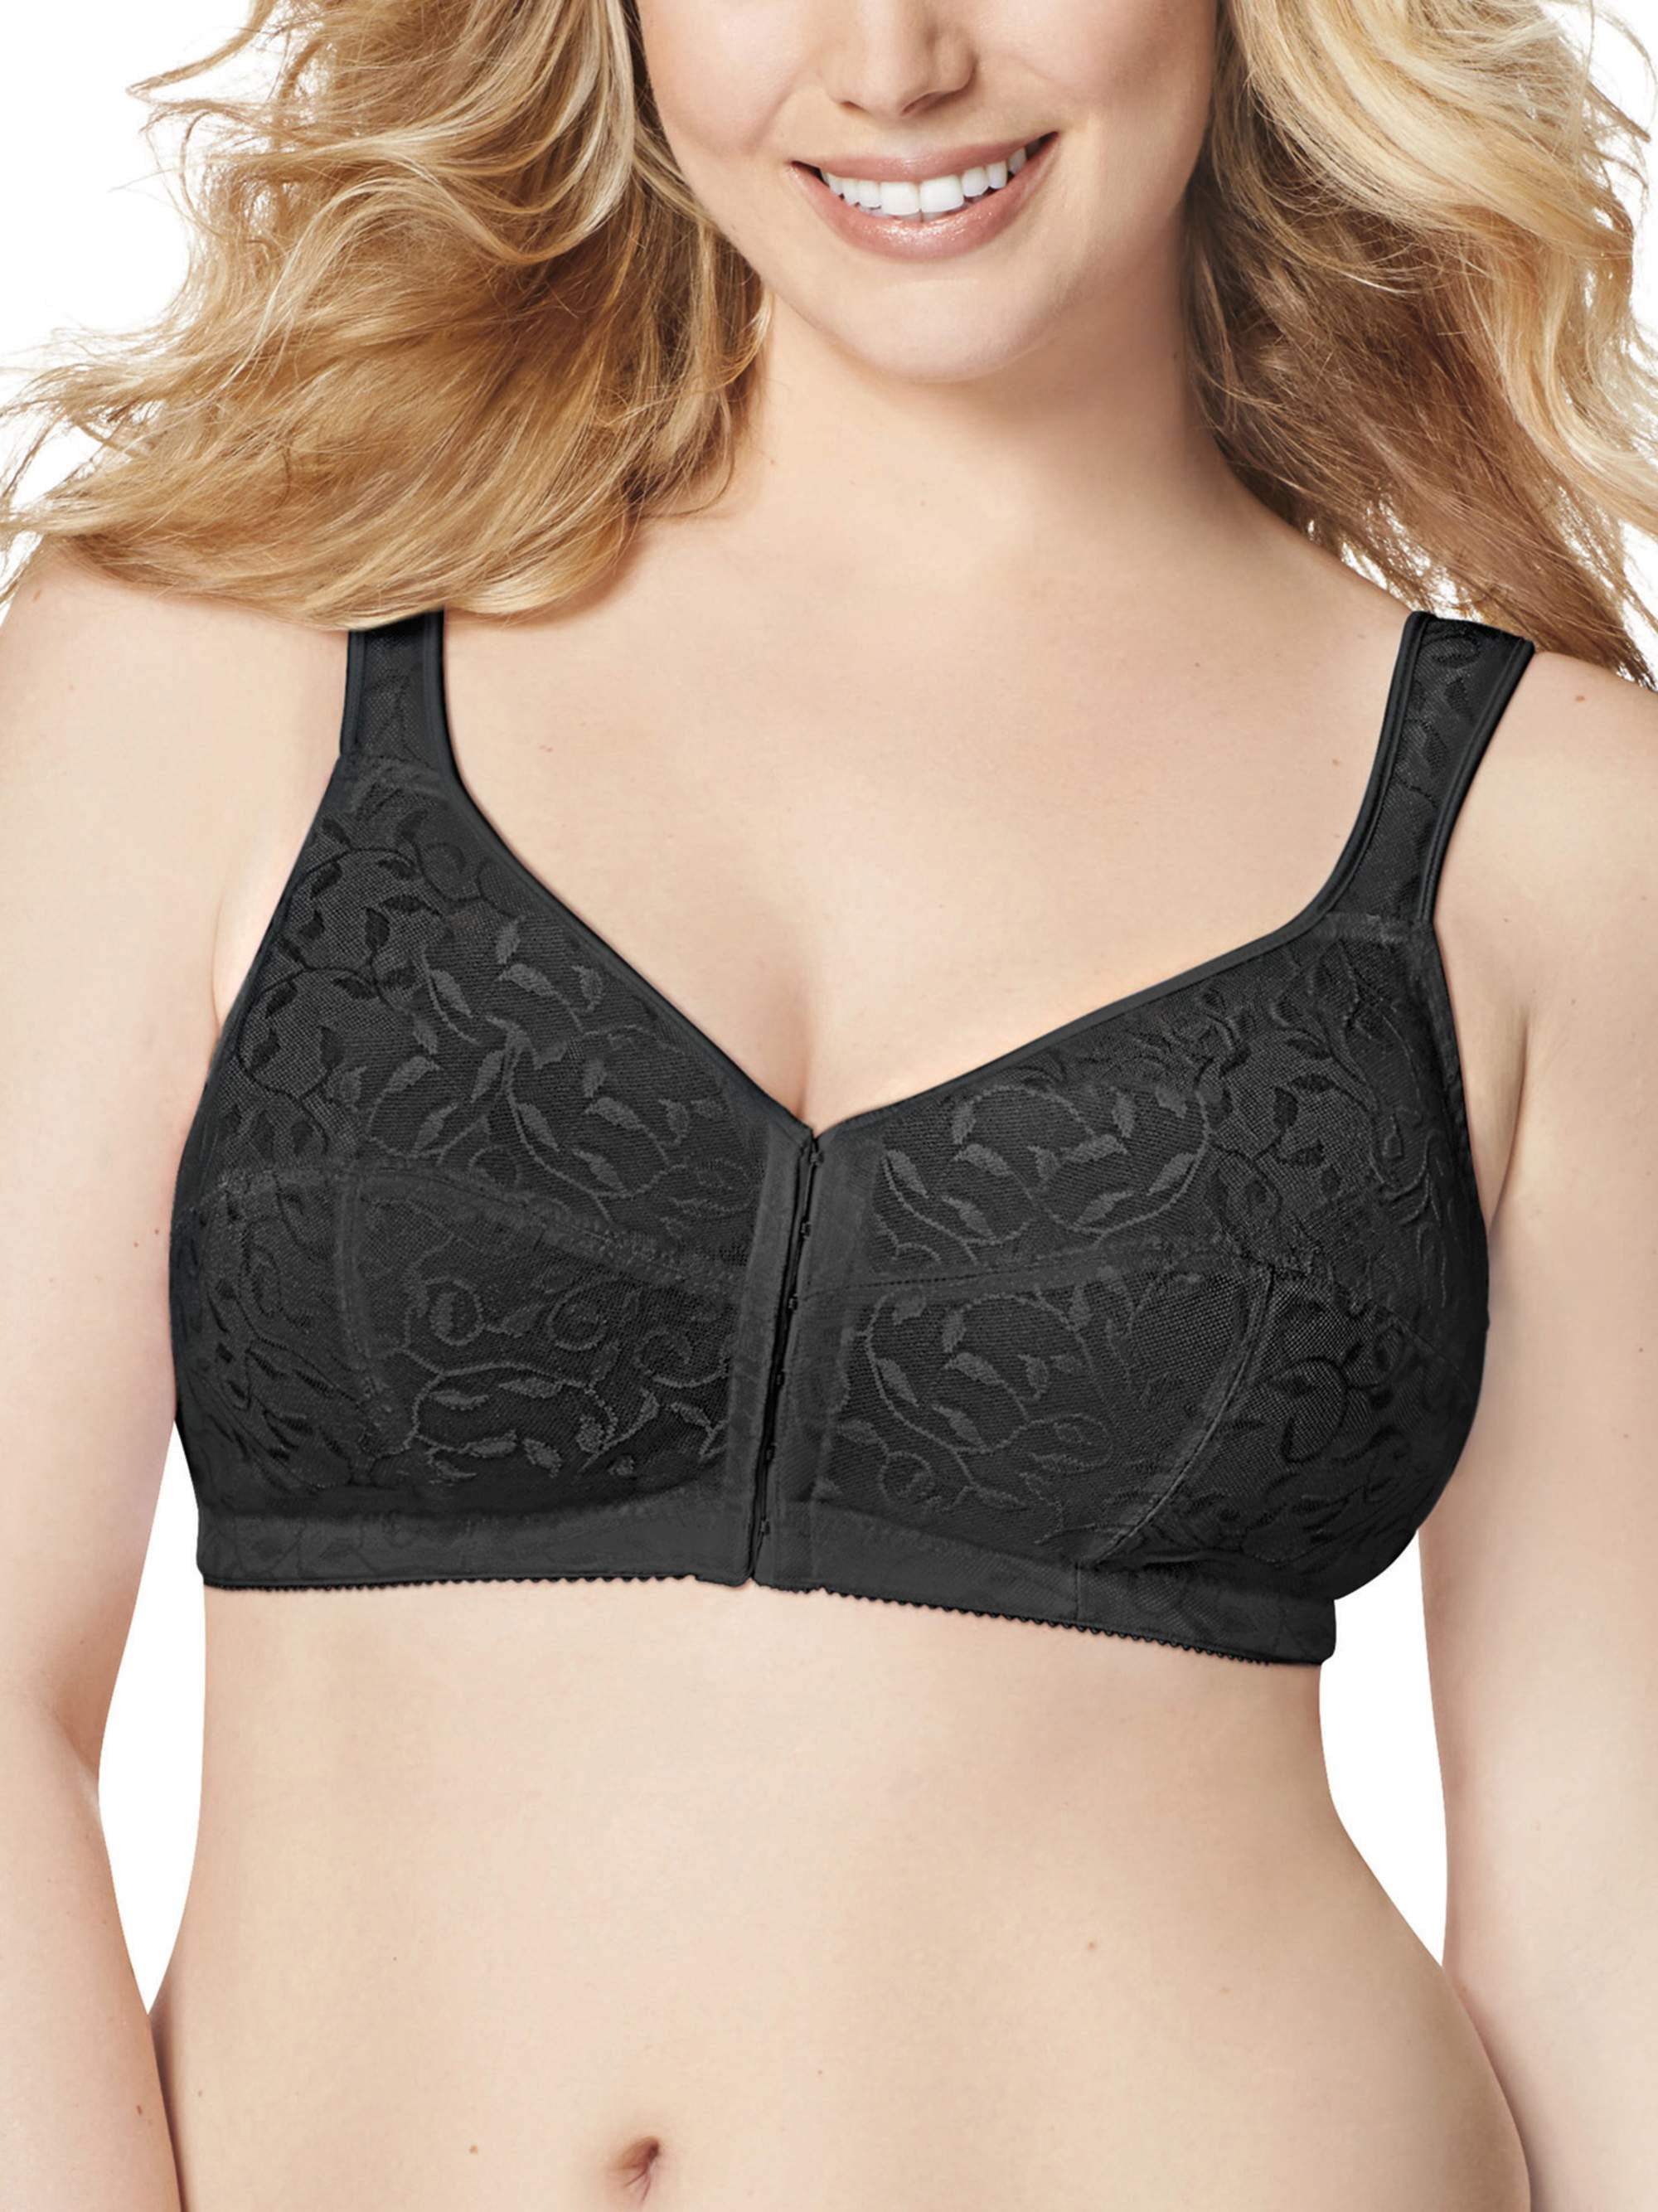 Playtex Just My Size Women's Easy-On Front Close Bra, Style MJ1107 